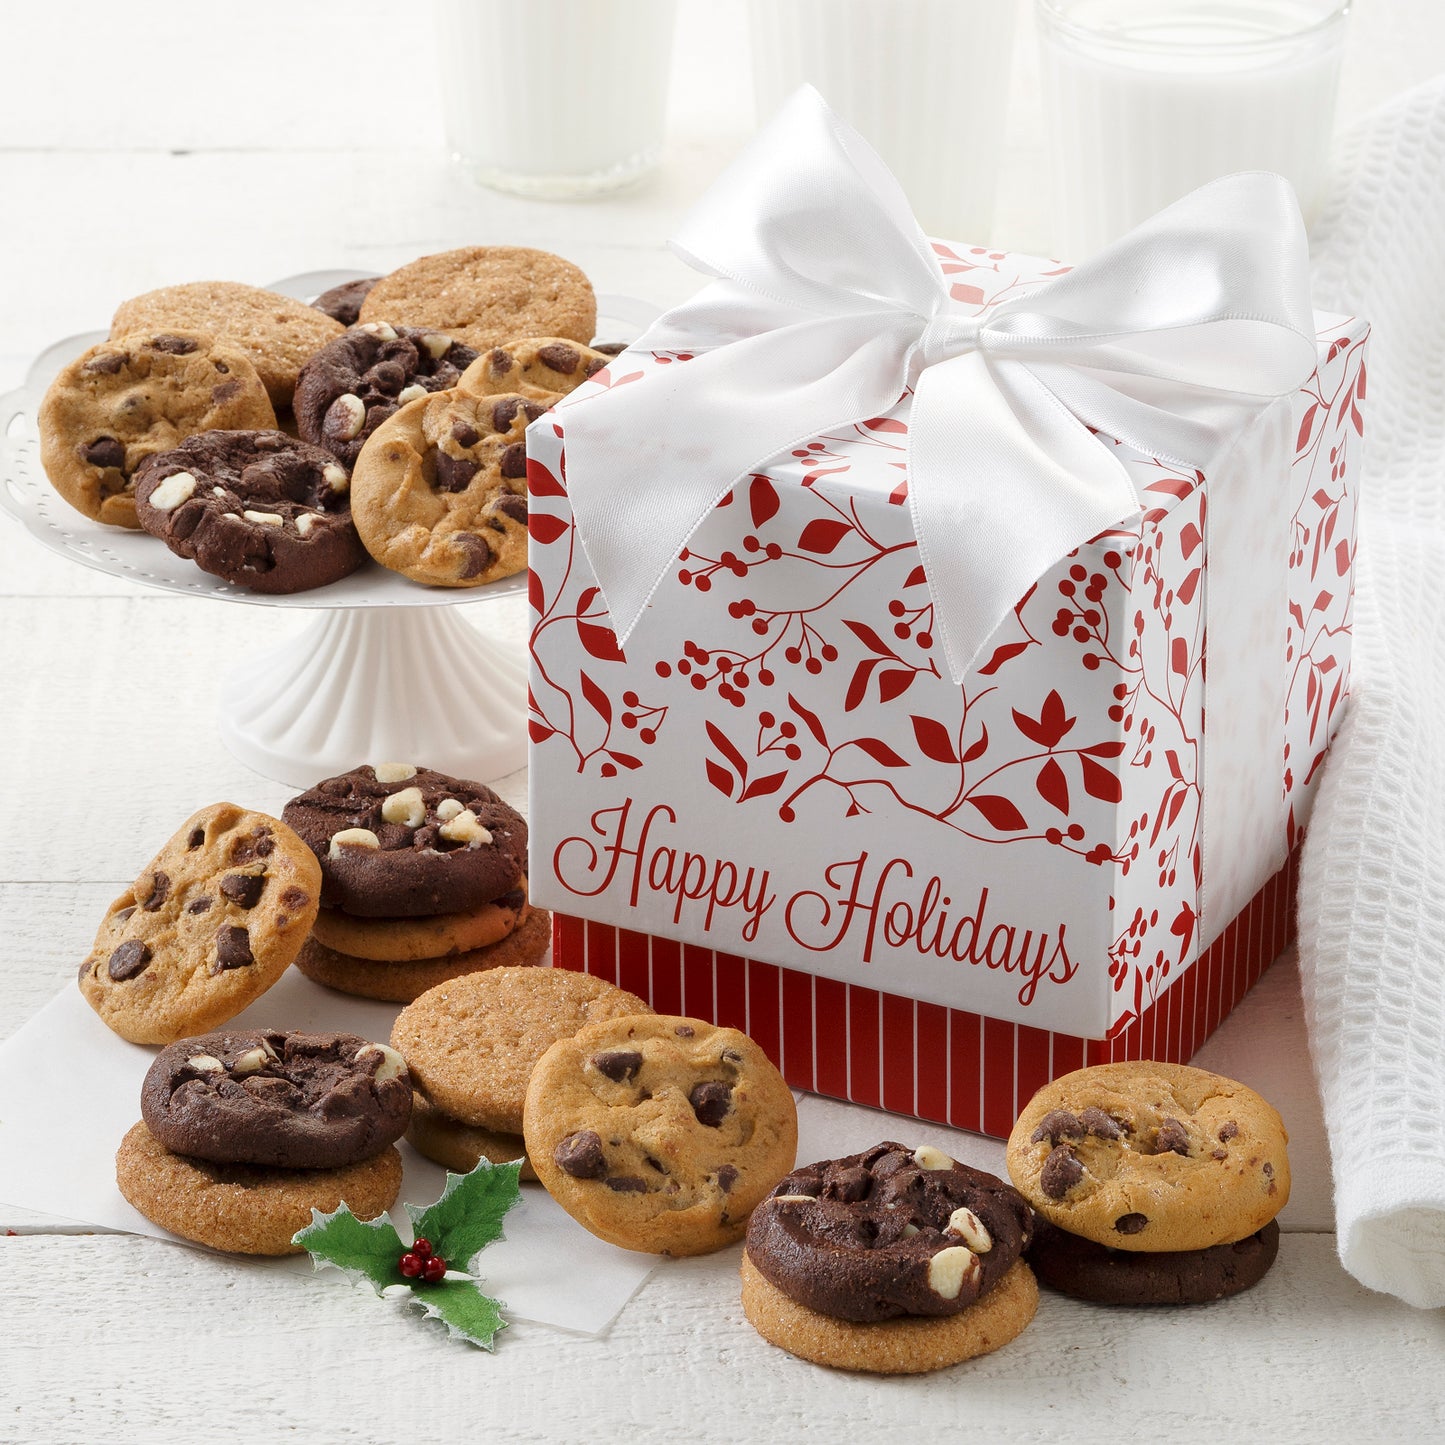 A Happy Holidays mini gift box decorated with holly and surrounded by nut free Nibblers®